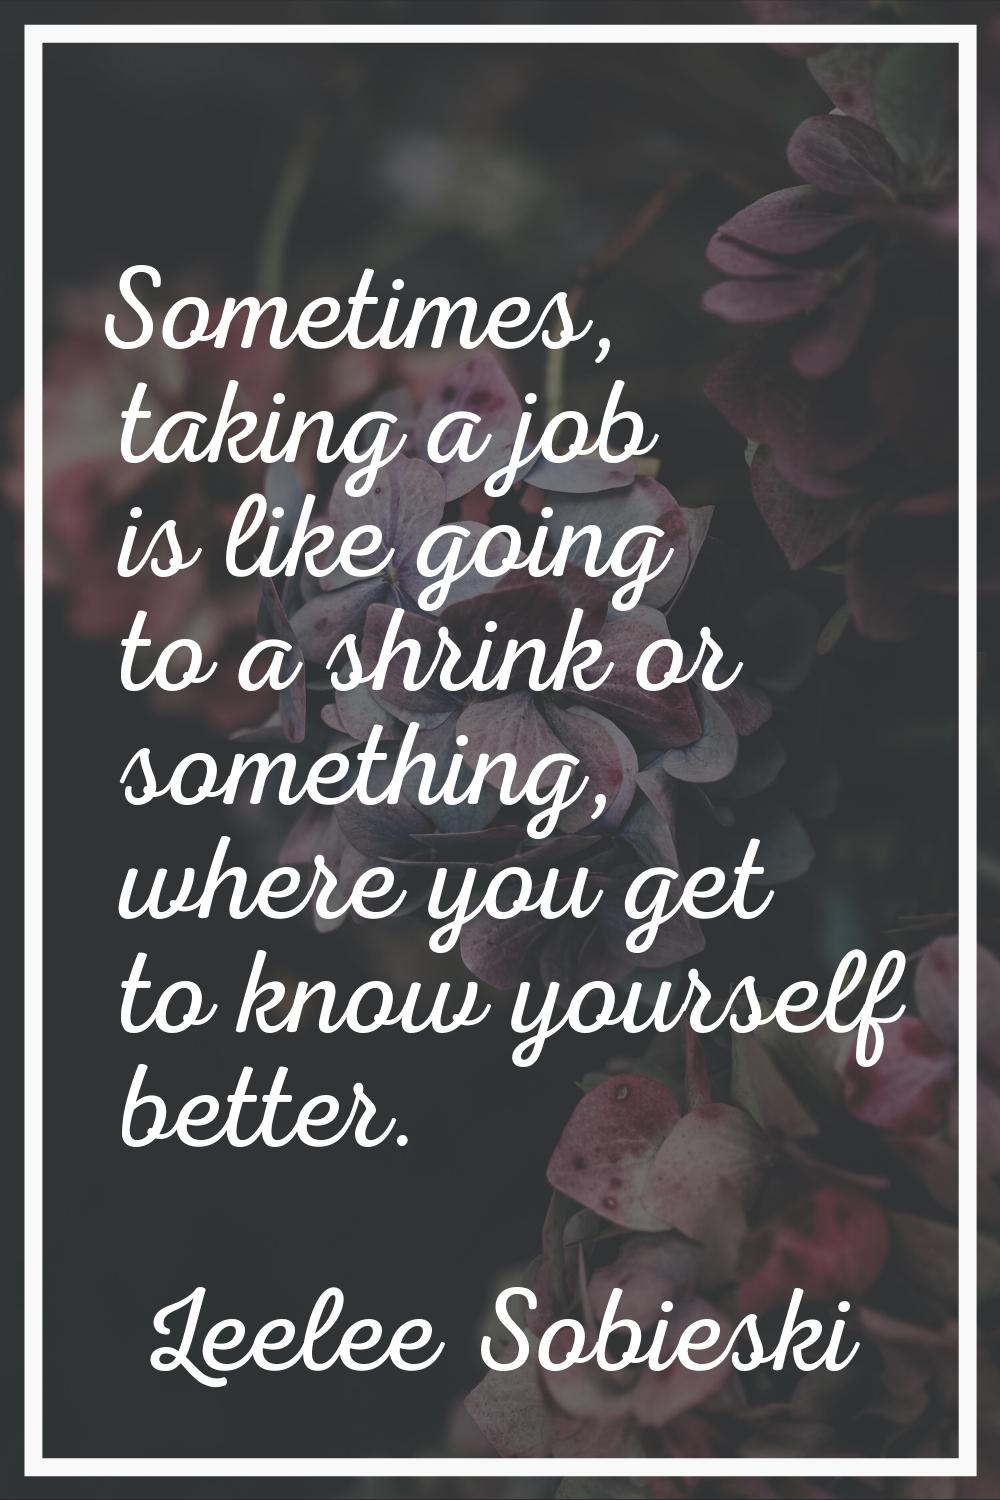 Sometimes, taking a job is like going to a shrink or something, where you get to know yourself bett